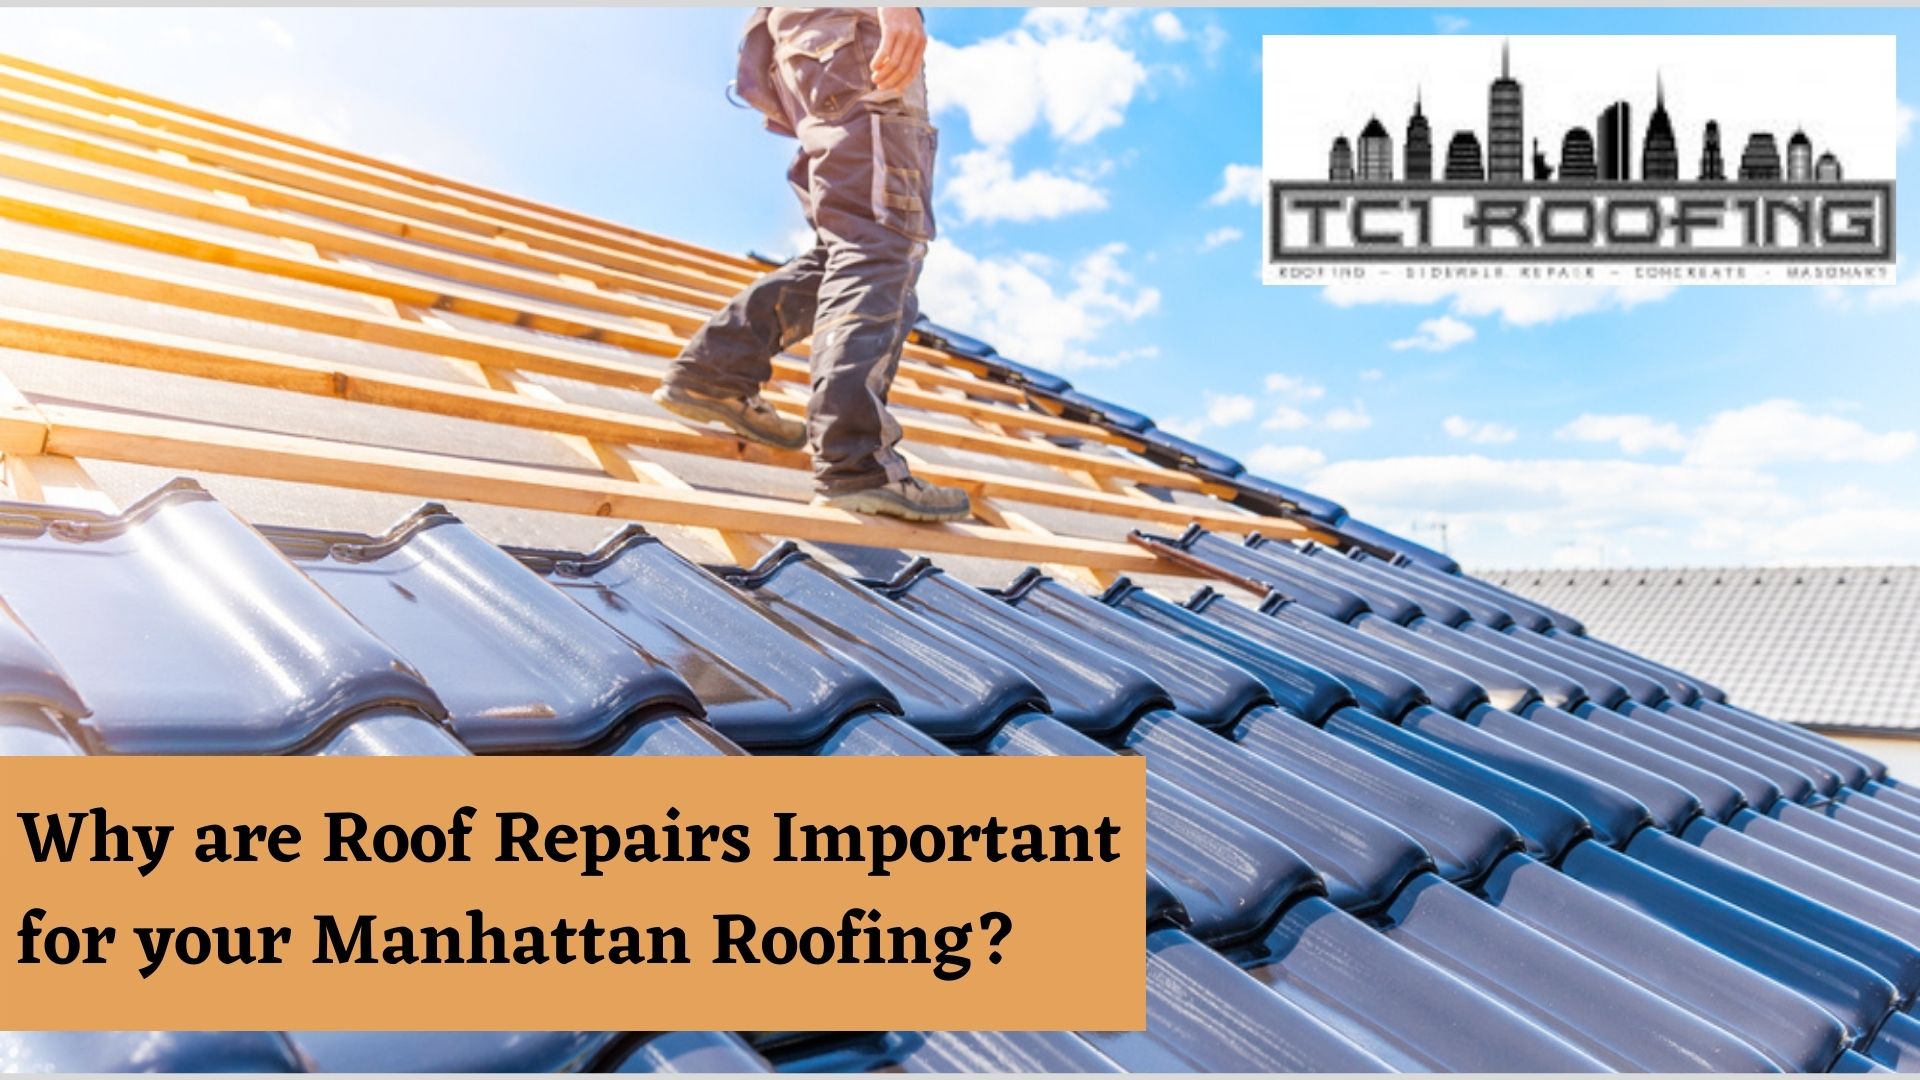 Why are Roof Repairs Important for your Manhattan Roofing? 1 Best